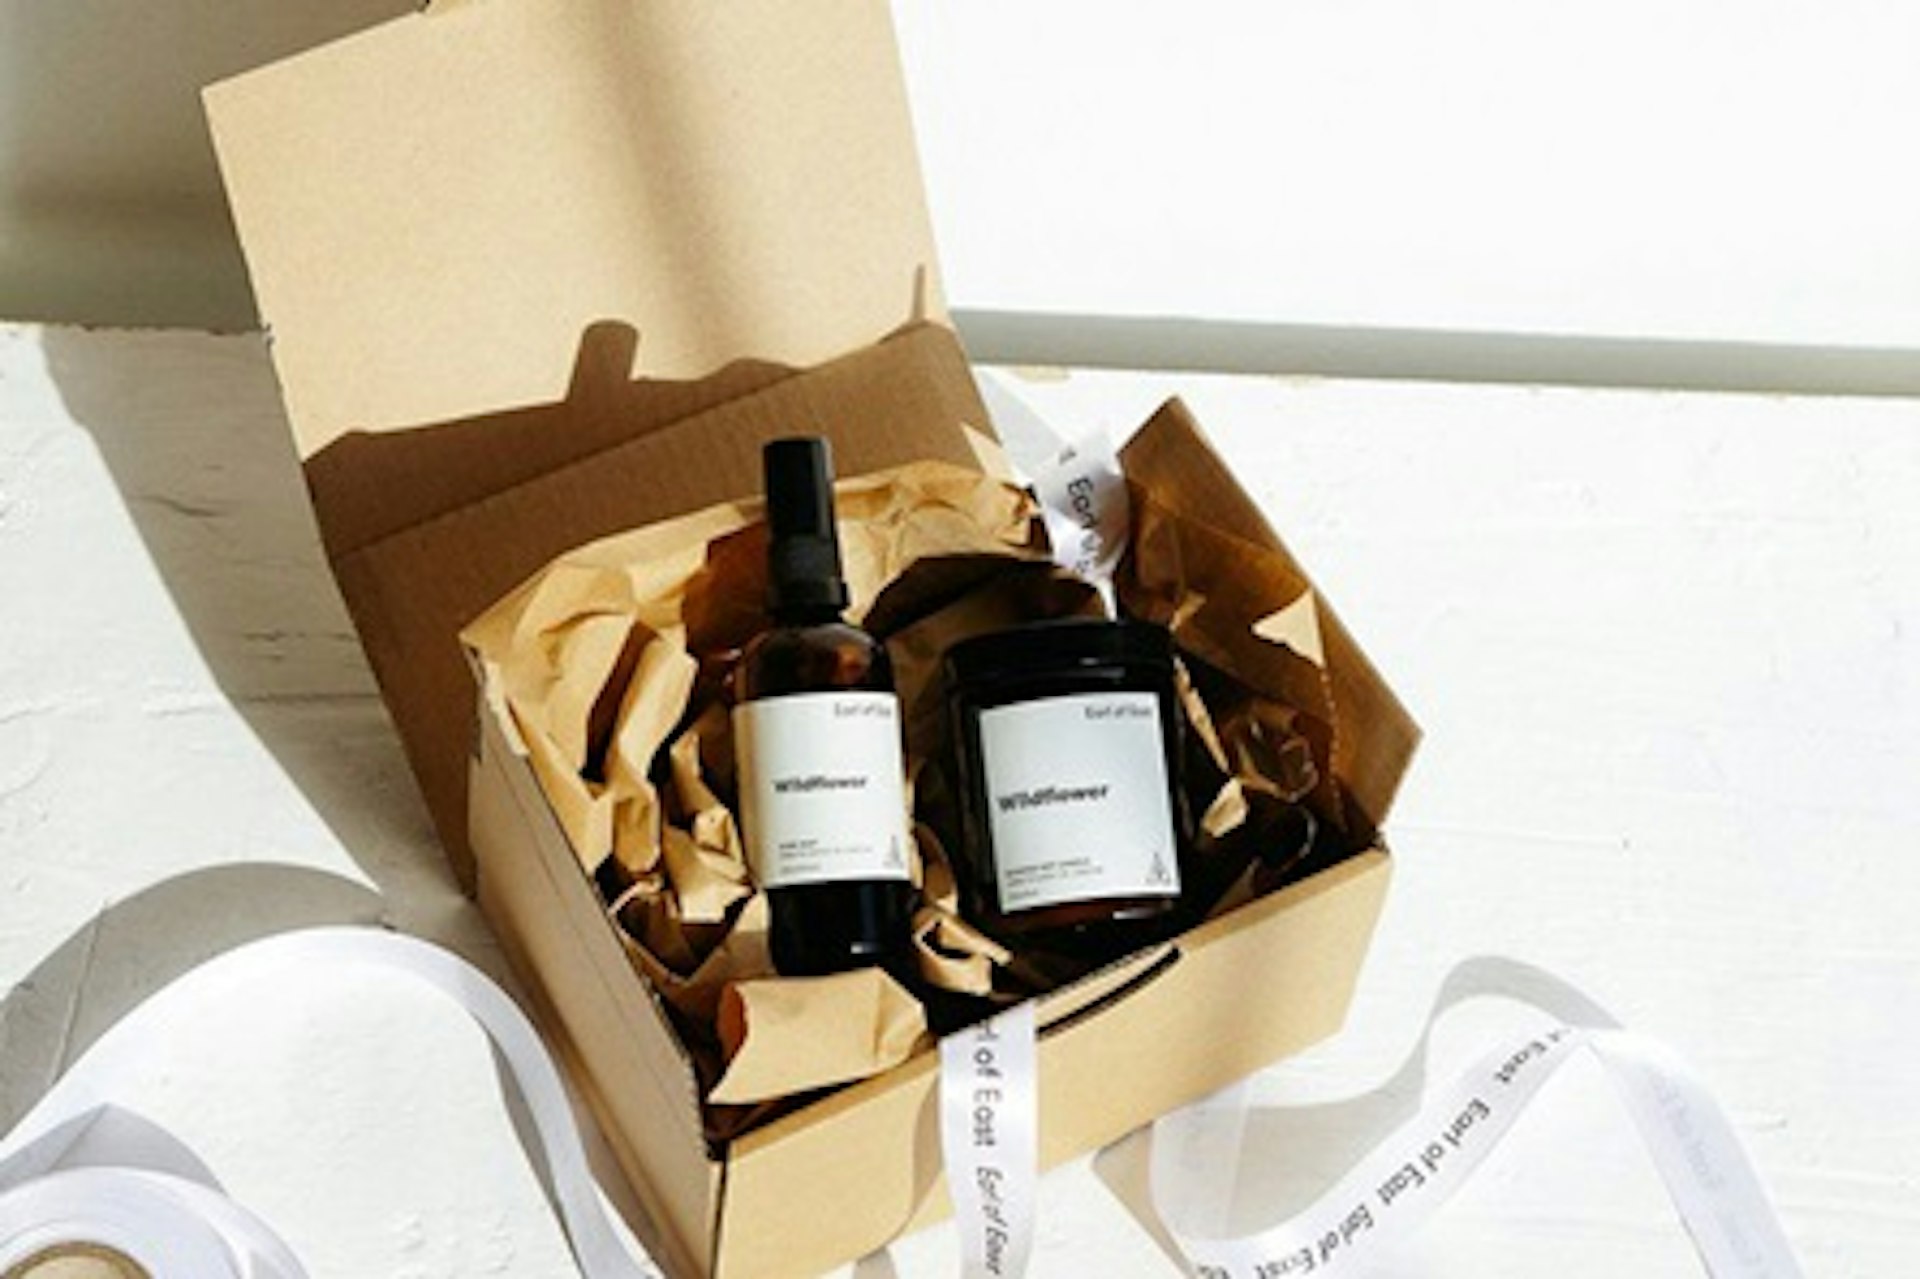 Candle and Home Mist Gift Set from Earl of East 3